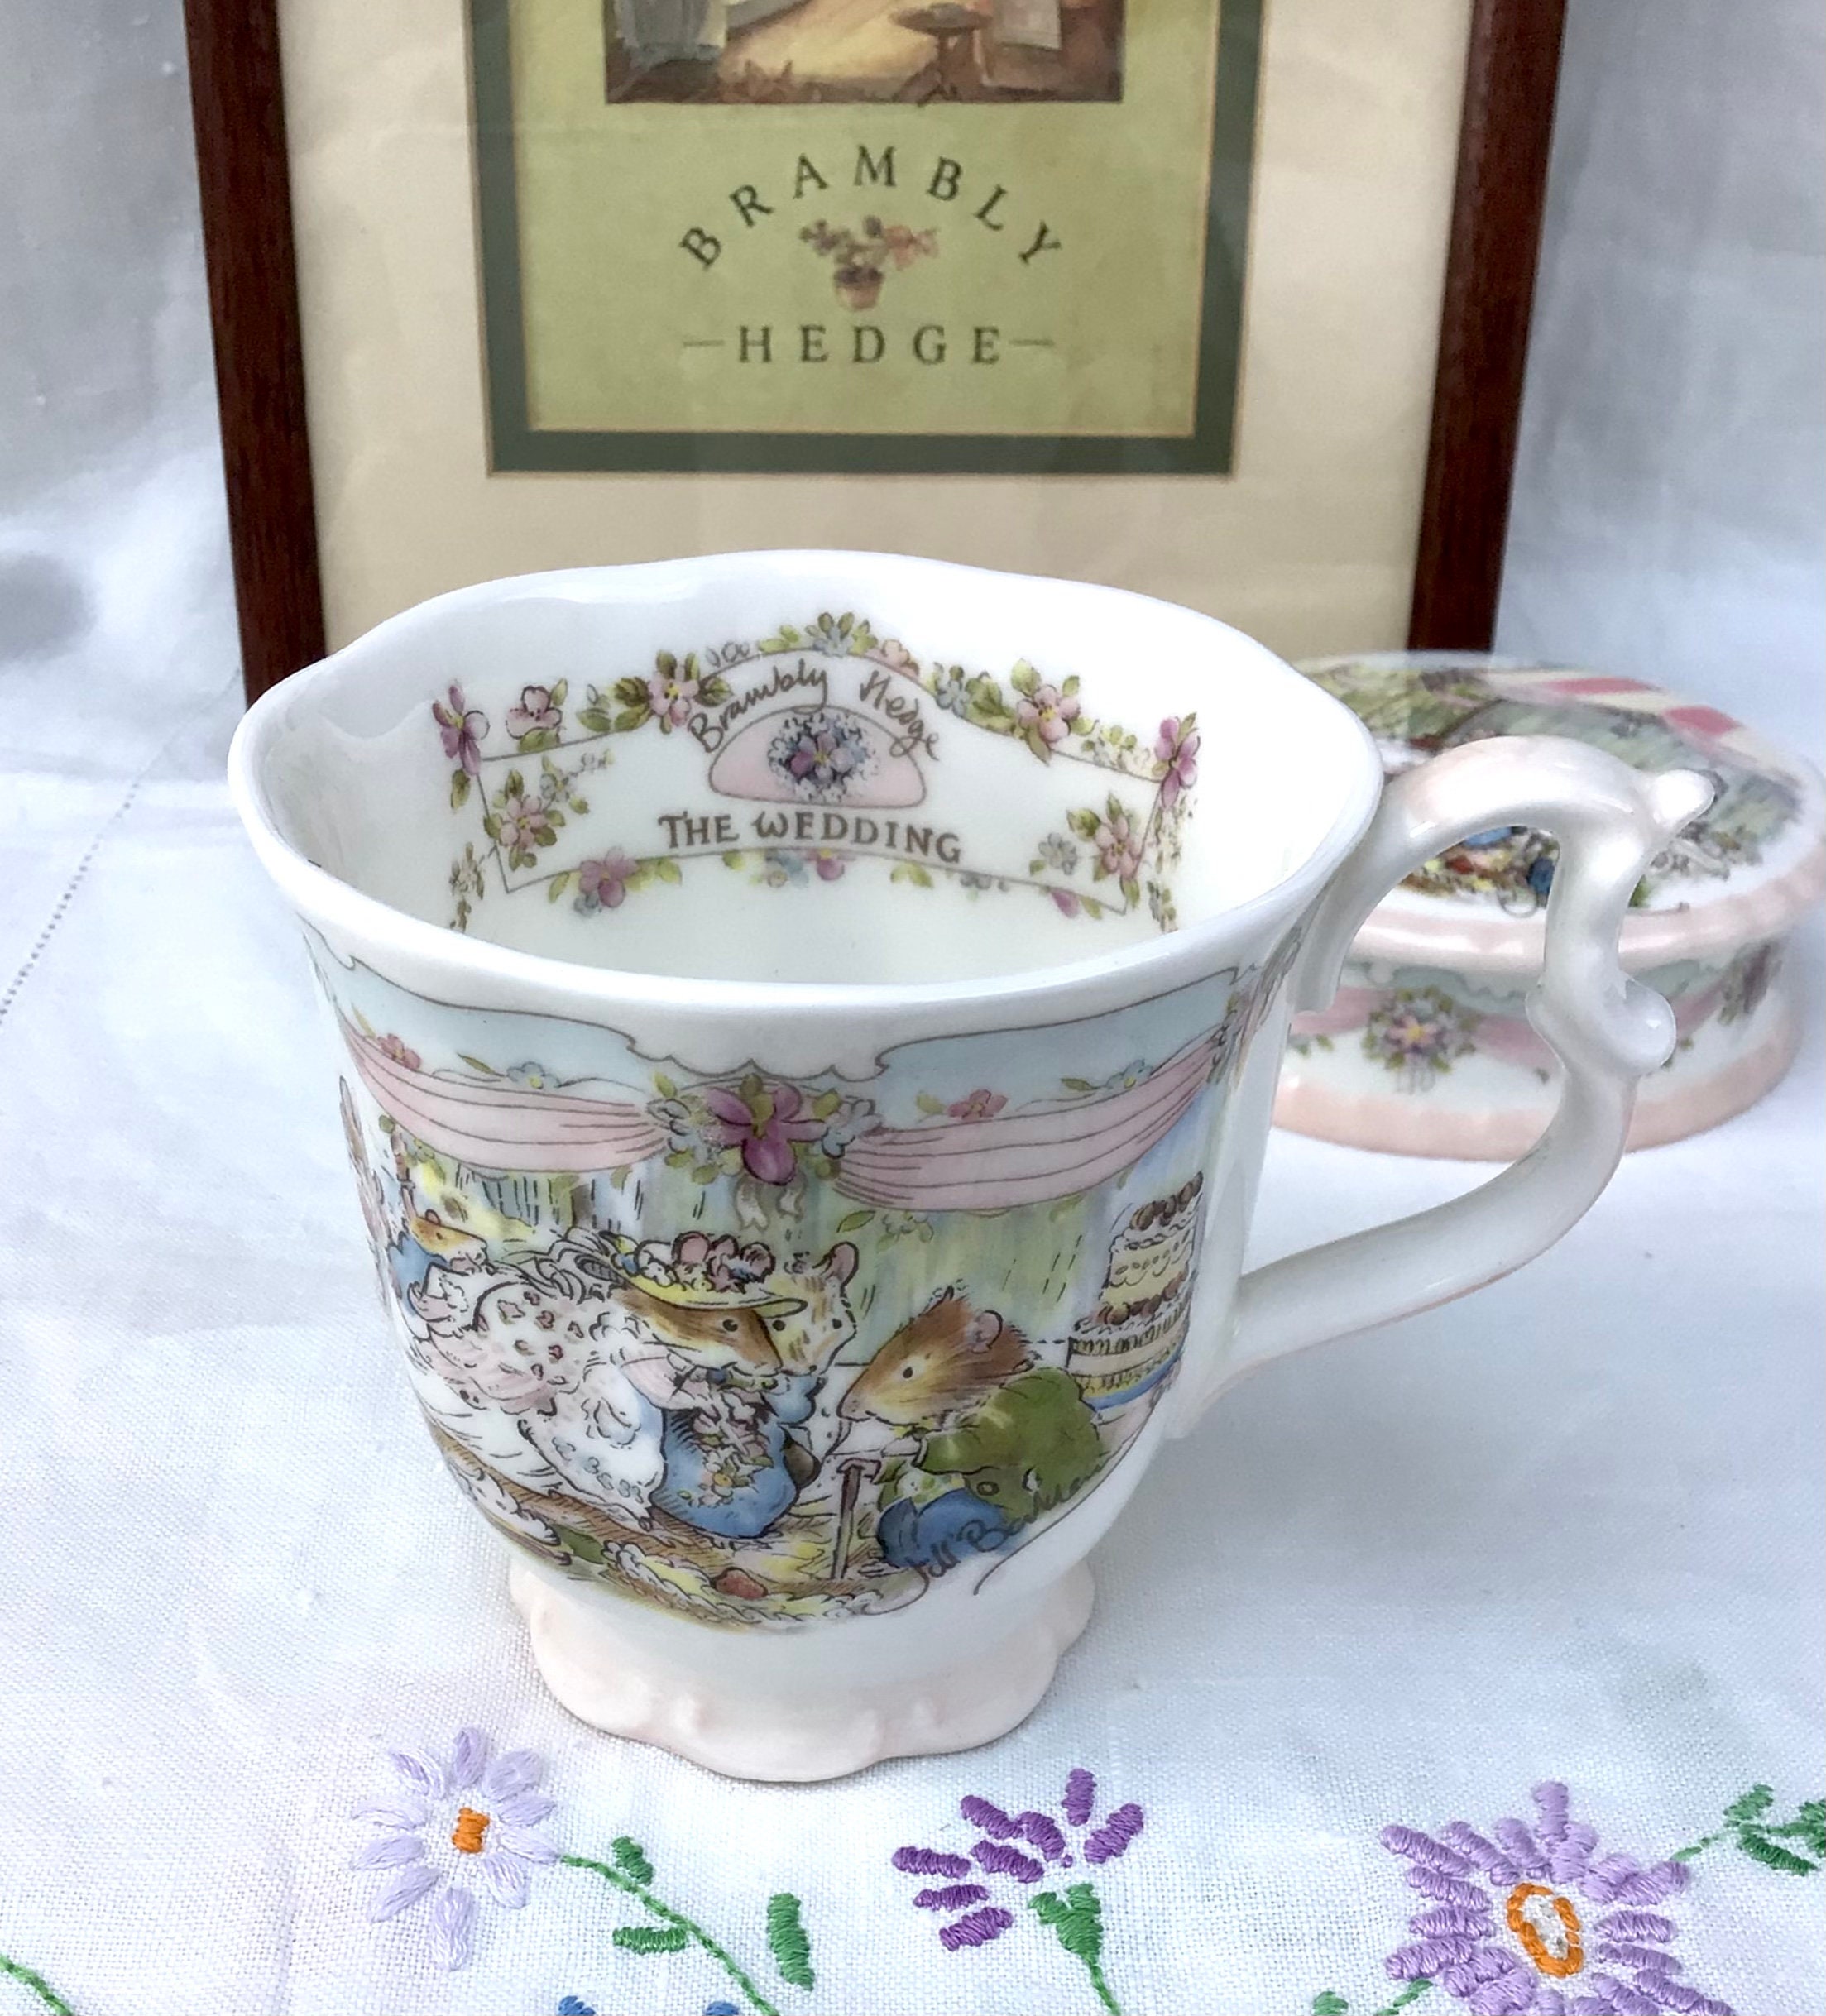 Brambly Hedge Wedding Royal Doulton Fine English China Beaker by Jill  Barklem, Brambly Hedge Mug, Collectible, 1987, Retired, Gift for Her -   Sweden